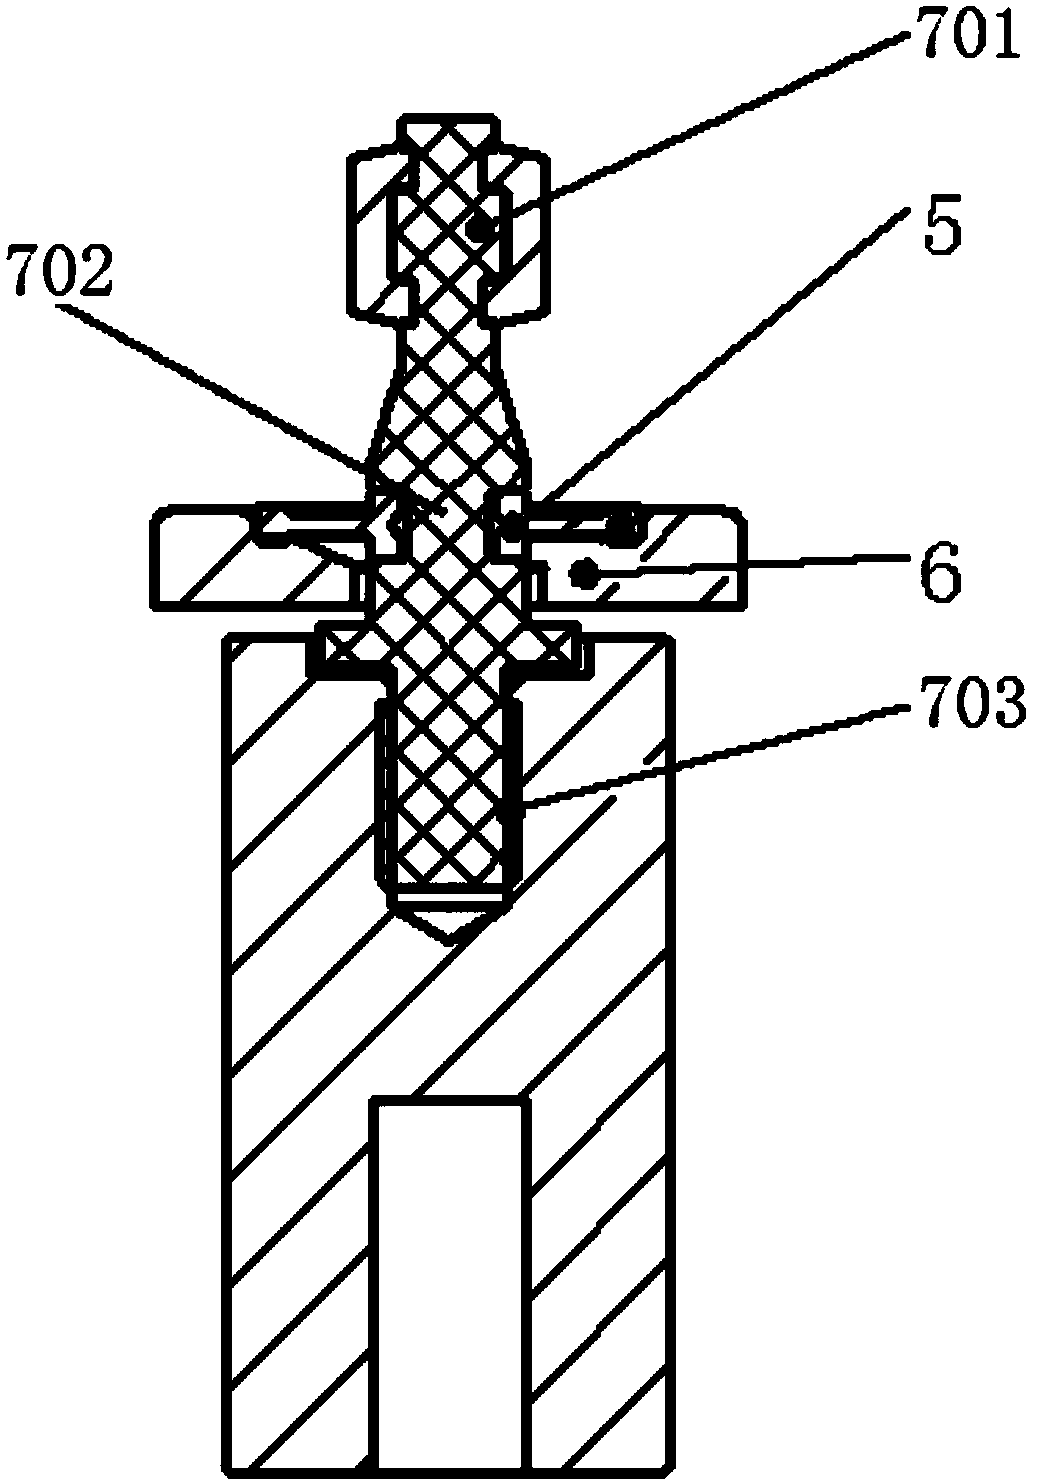 A three-way D-type solenoid valve and its application method